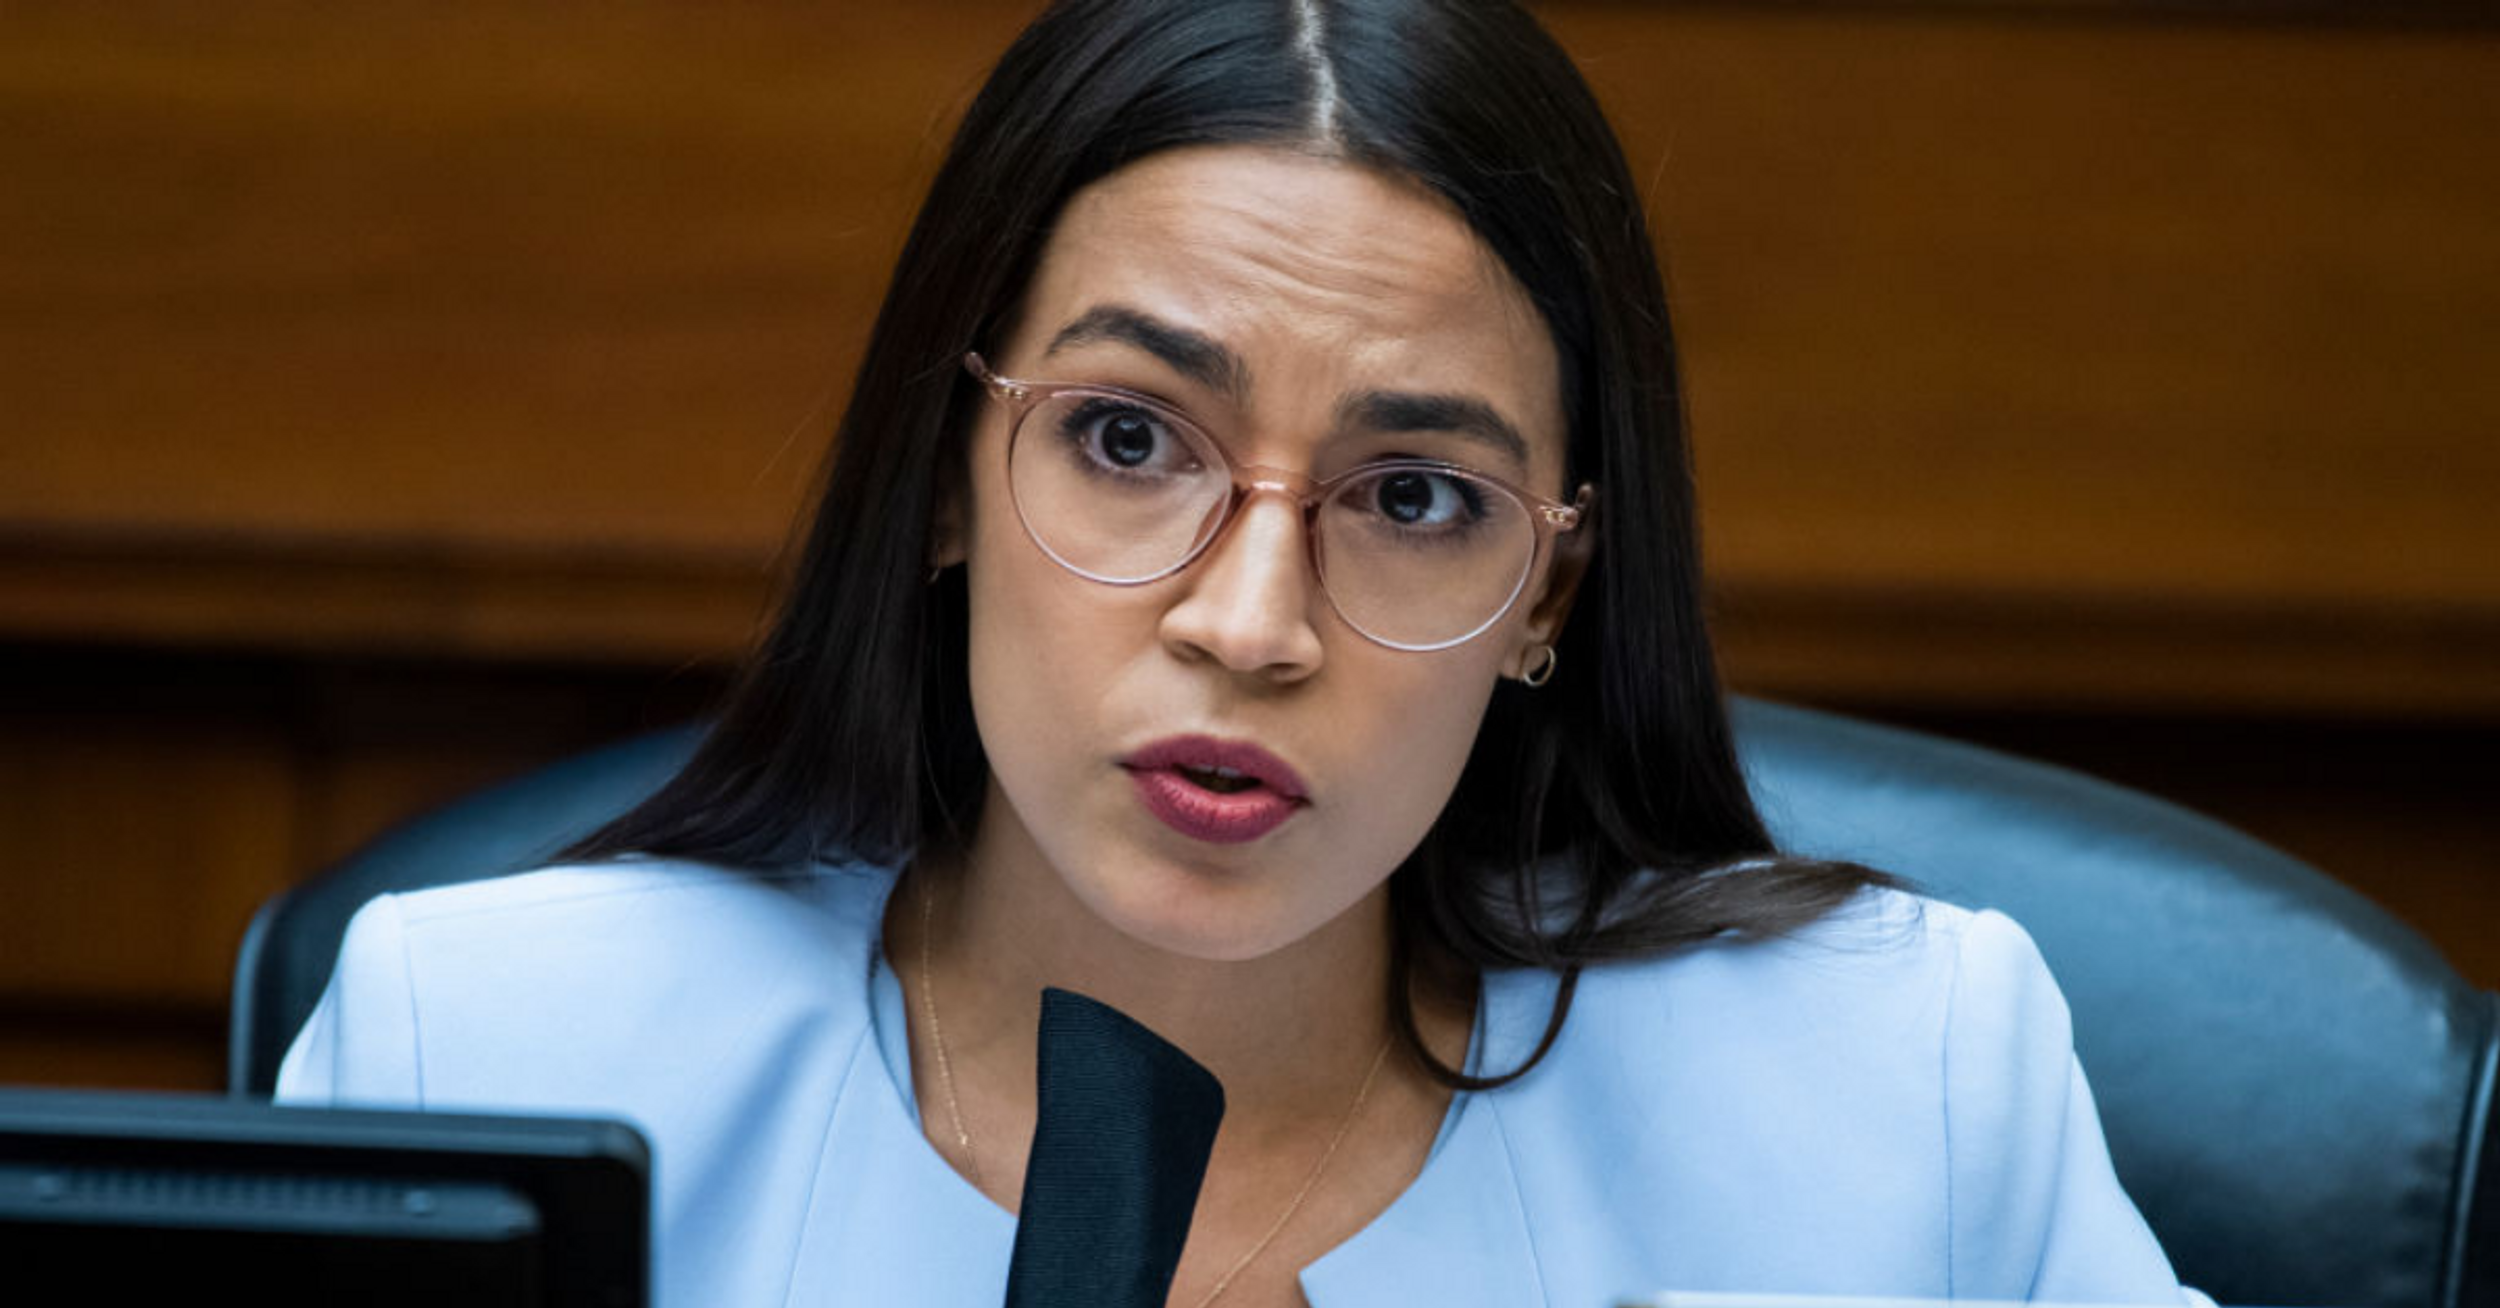 AOC Bluntly Scorches Wells Fargo CEO Who Lamented The 'Very Limited Pool Of Black Talent'